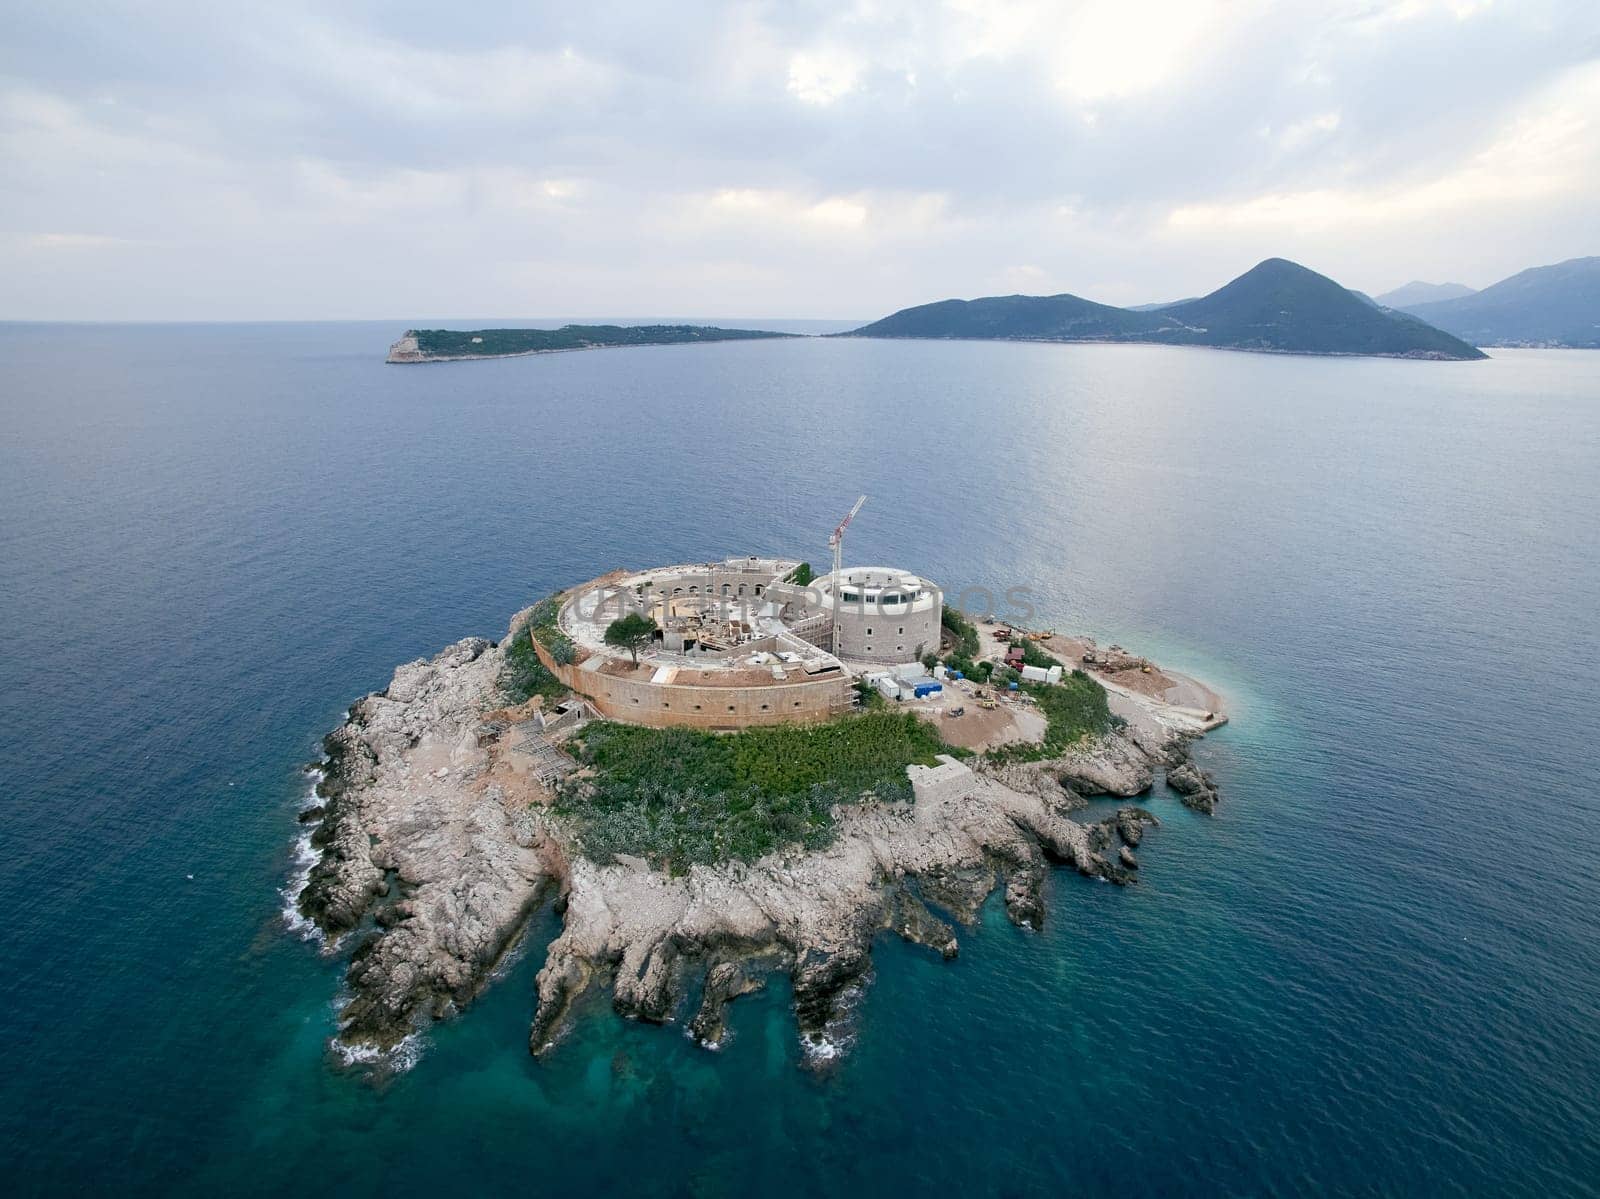 Fortress Mamula on the island of Lastavica in the sea. Montenegro. Drone by Nadtochiy